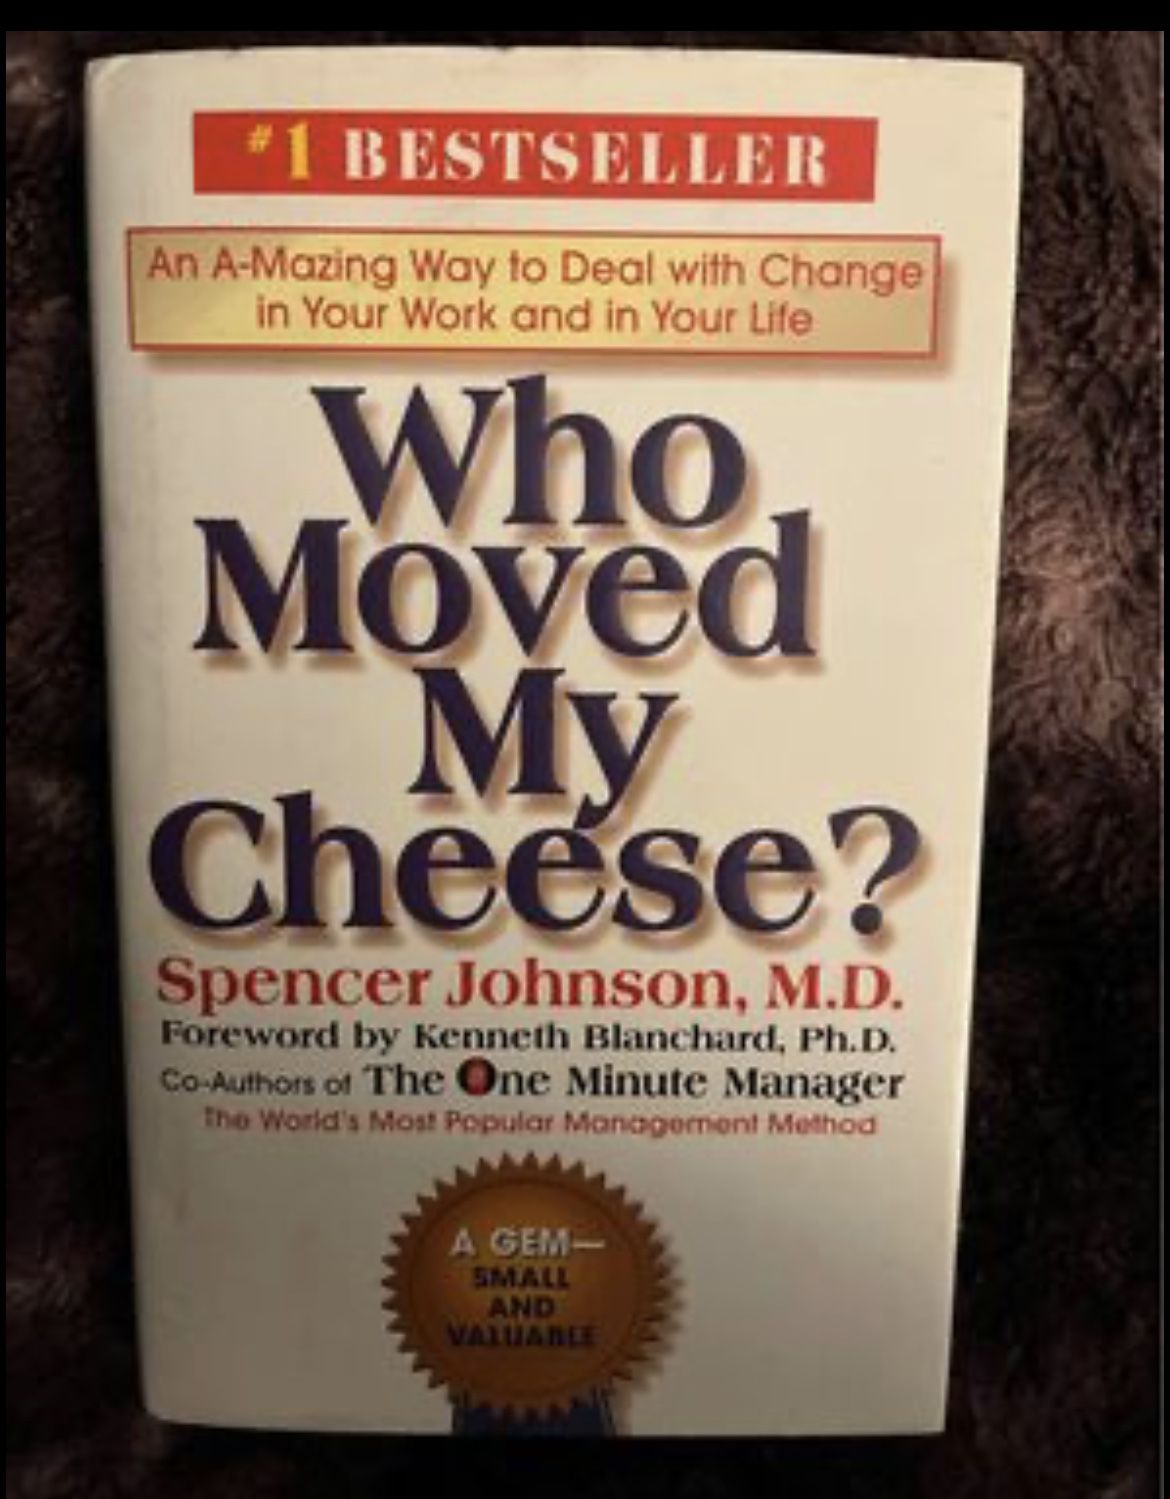 Book 📕 Who Moved My Cheese, by Spencer Johnson, M.D.